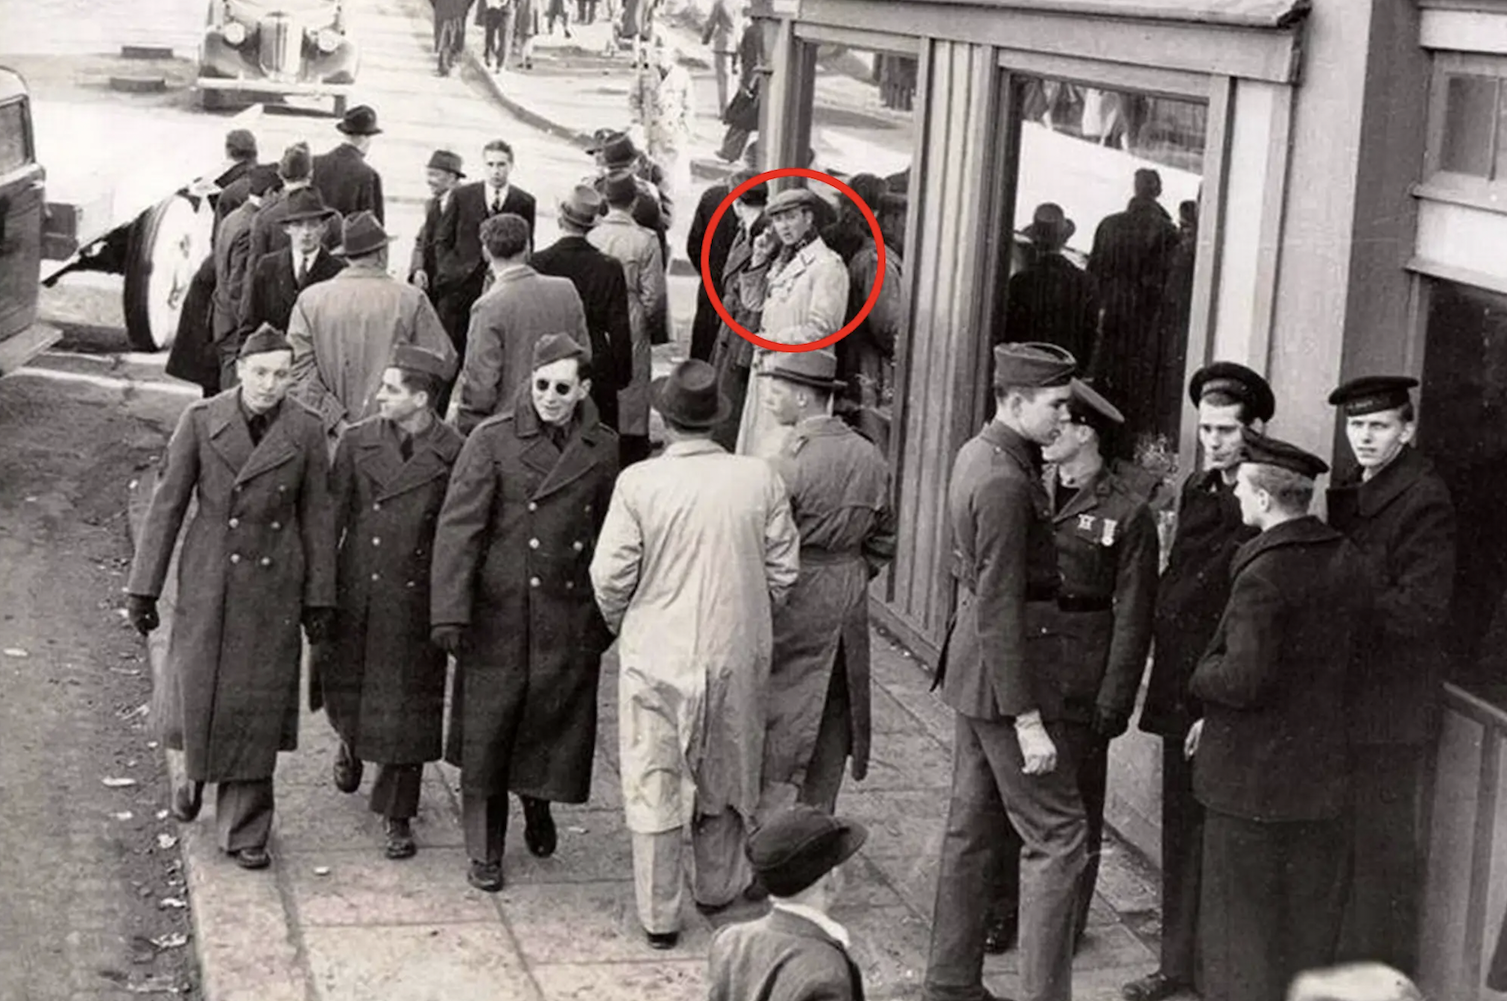 This photo comes from 1943 in Reykjavík, Iceland, and a man can be seen standing next to deployed US soldiers during World War II. The photo was posted in an Icelandic Facebook group, where people debated if he really is holding a cellphone.